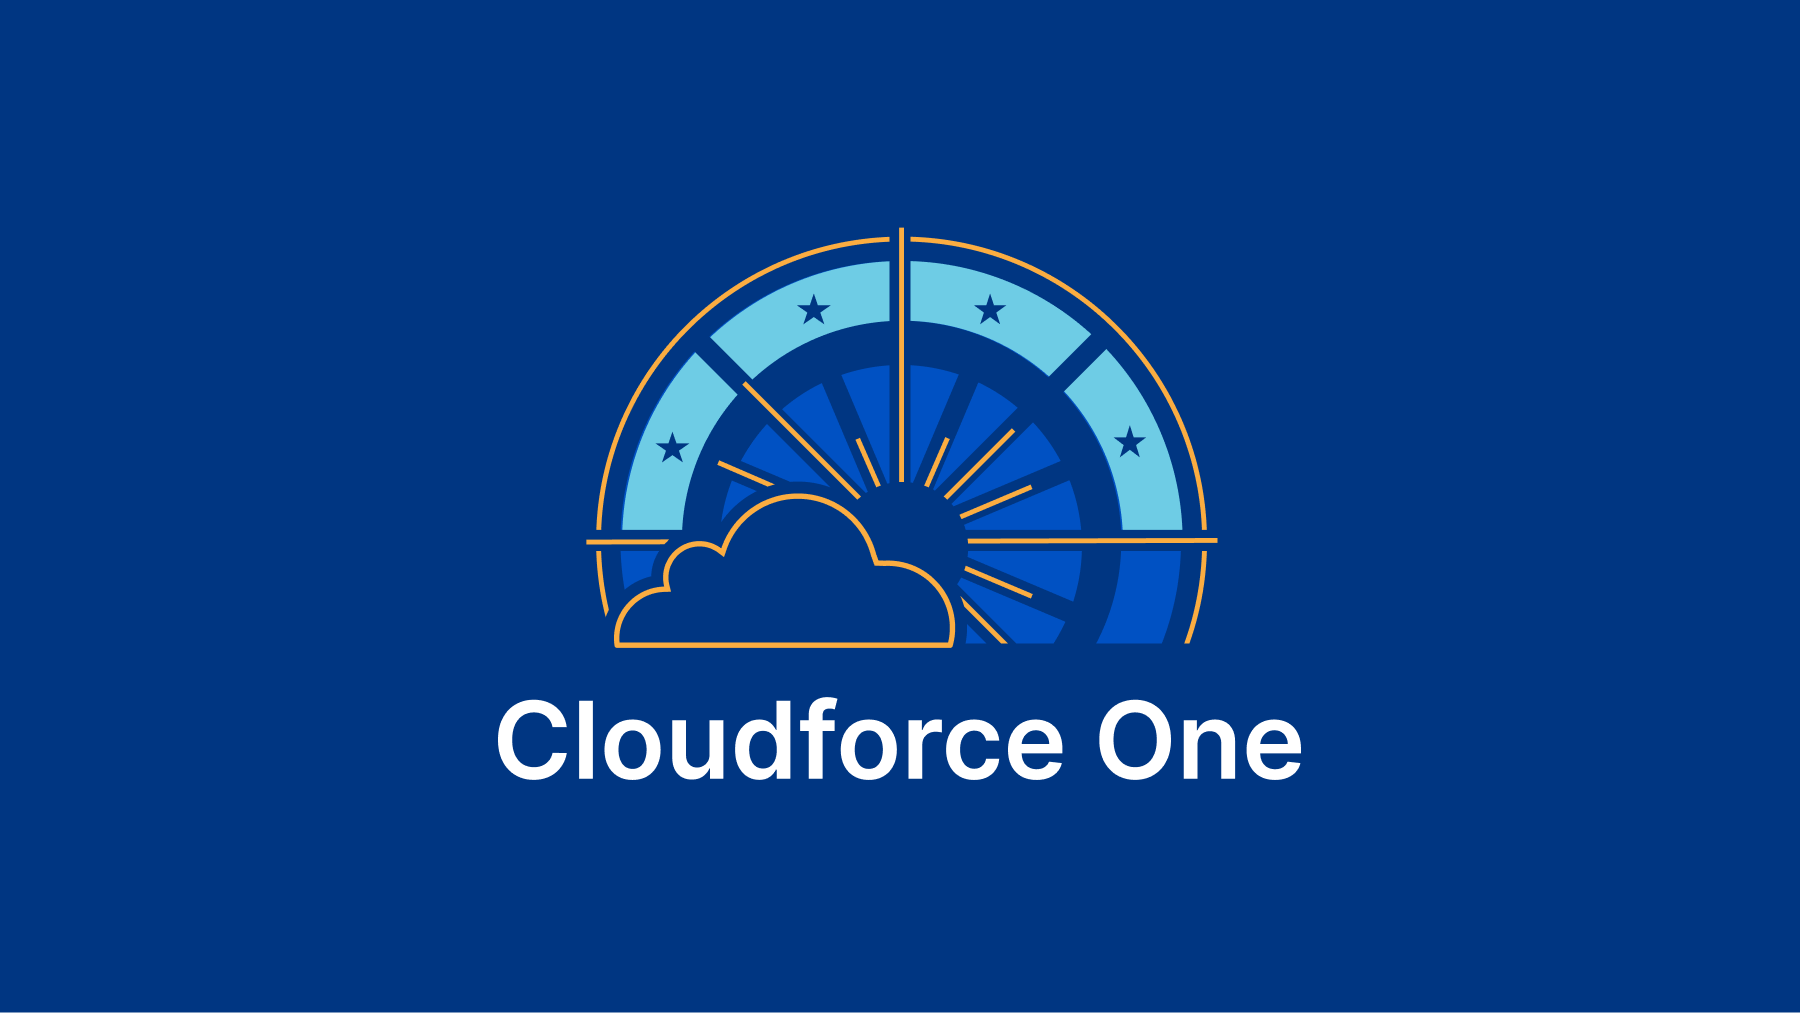 Cloudflare One Week 2022 - Introducing New Threat Intel Team